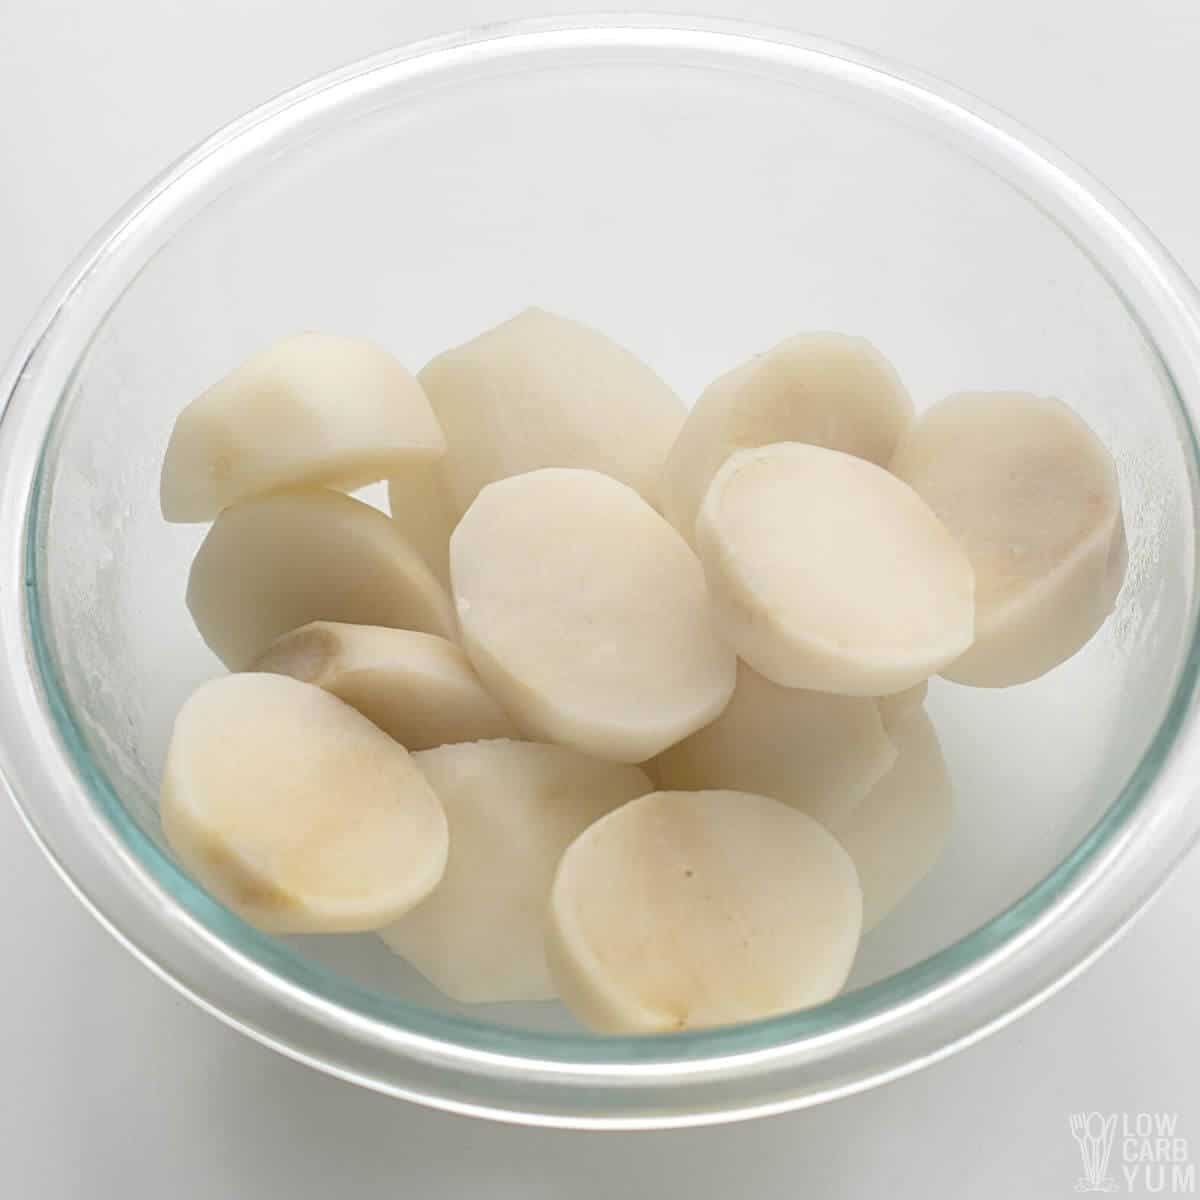 boiled turnips in glass bowl.